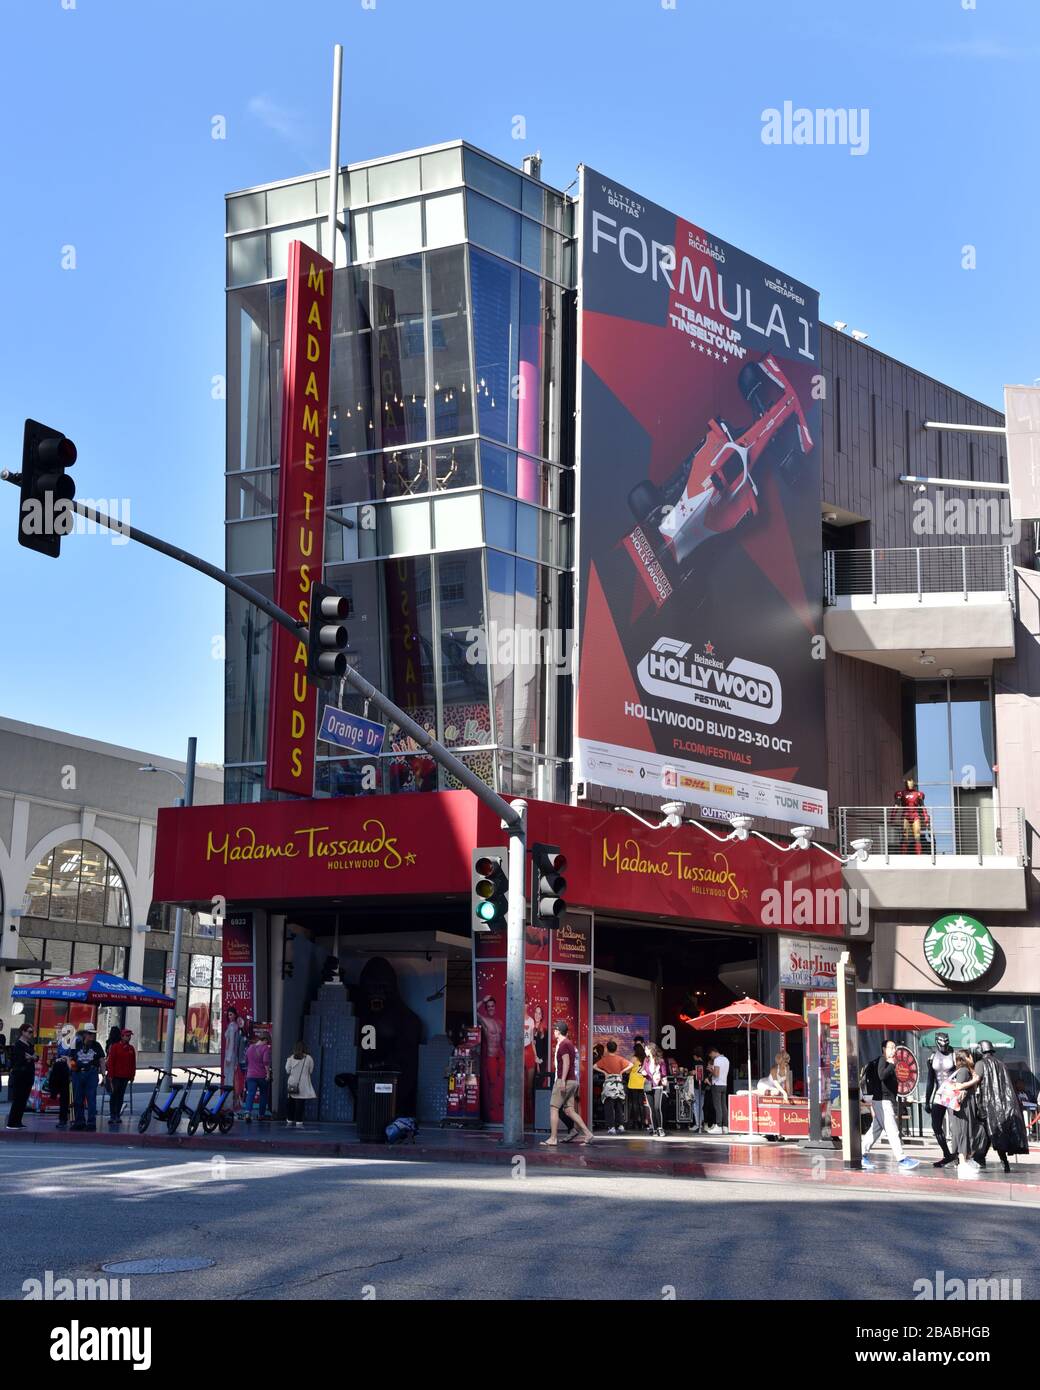 HOLLYWOOD, CA/USA - JANUARY 27, 2020: Madame Tussauds Wax Museum on the Hollywood Walk of Fame Stock Photo